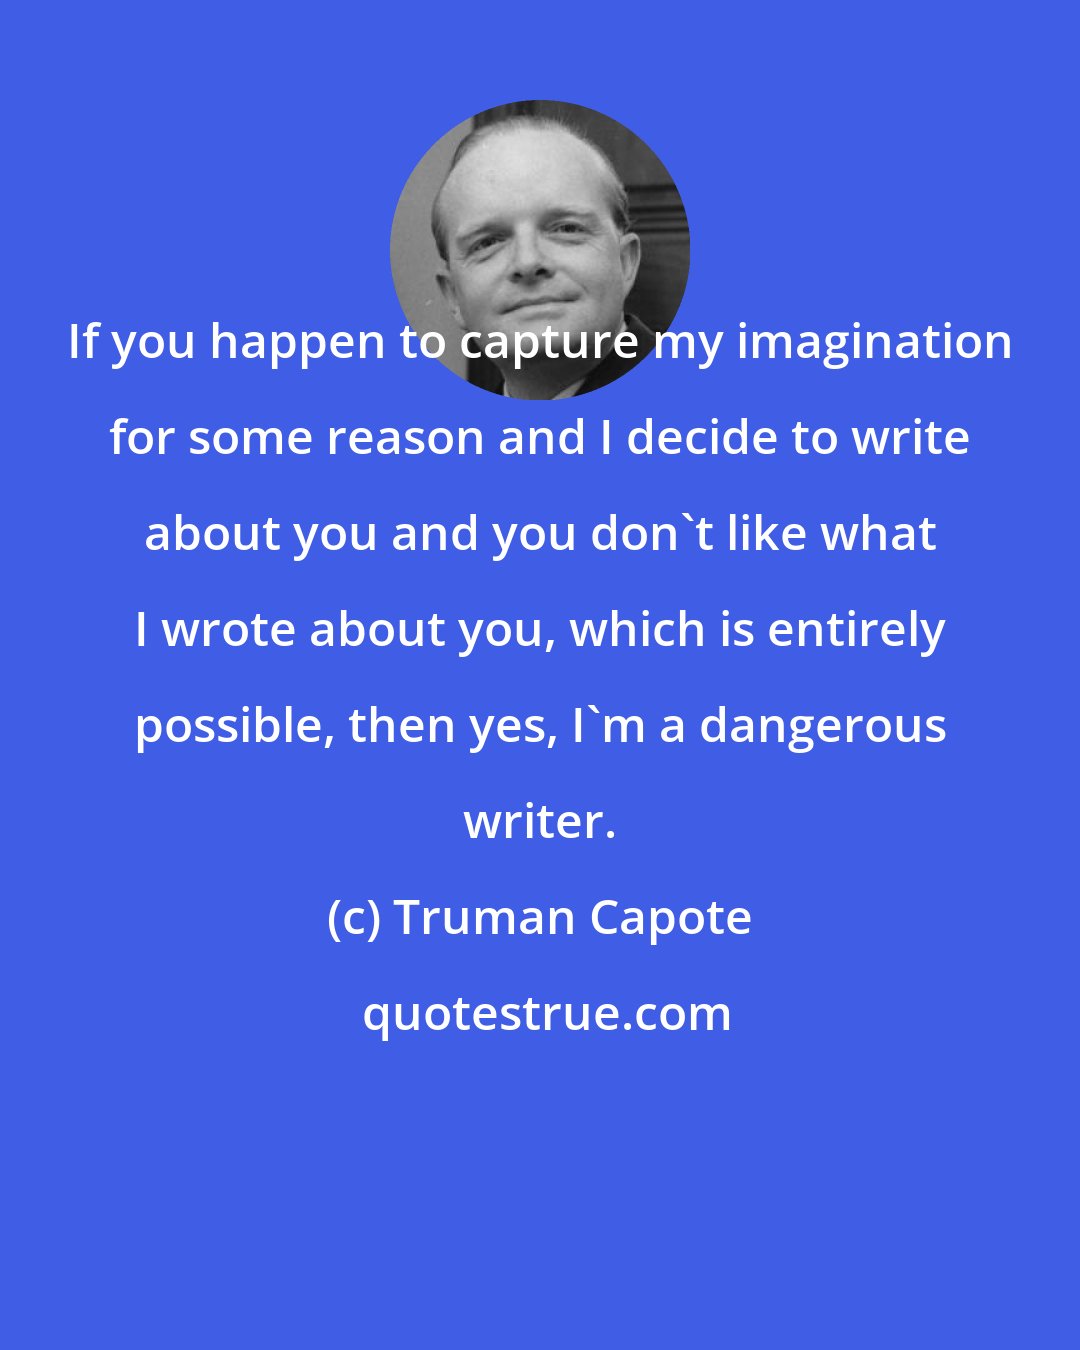 Truman Capote: If you happen to capture my imagination for some reason and I decide to write about you and you don't like what I wrote about you, which is entirely possible, then yes, I'm a dangerous writer.